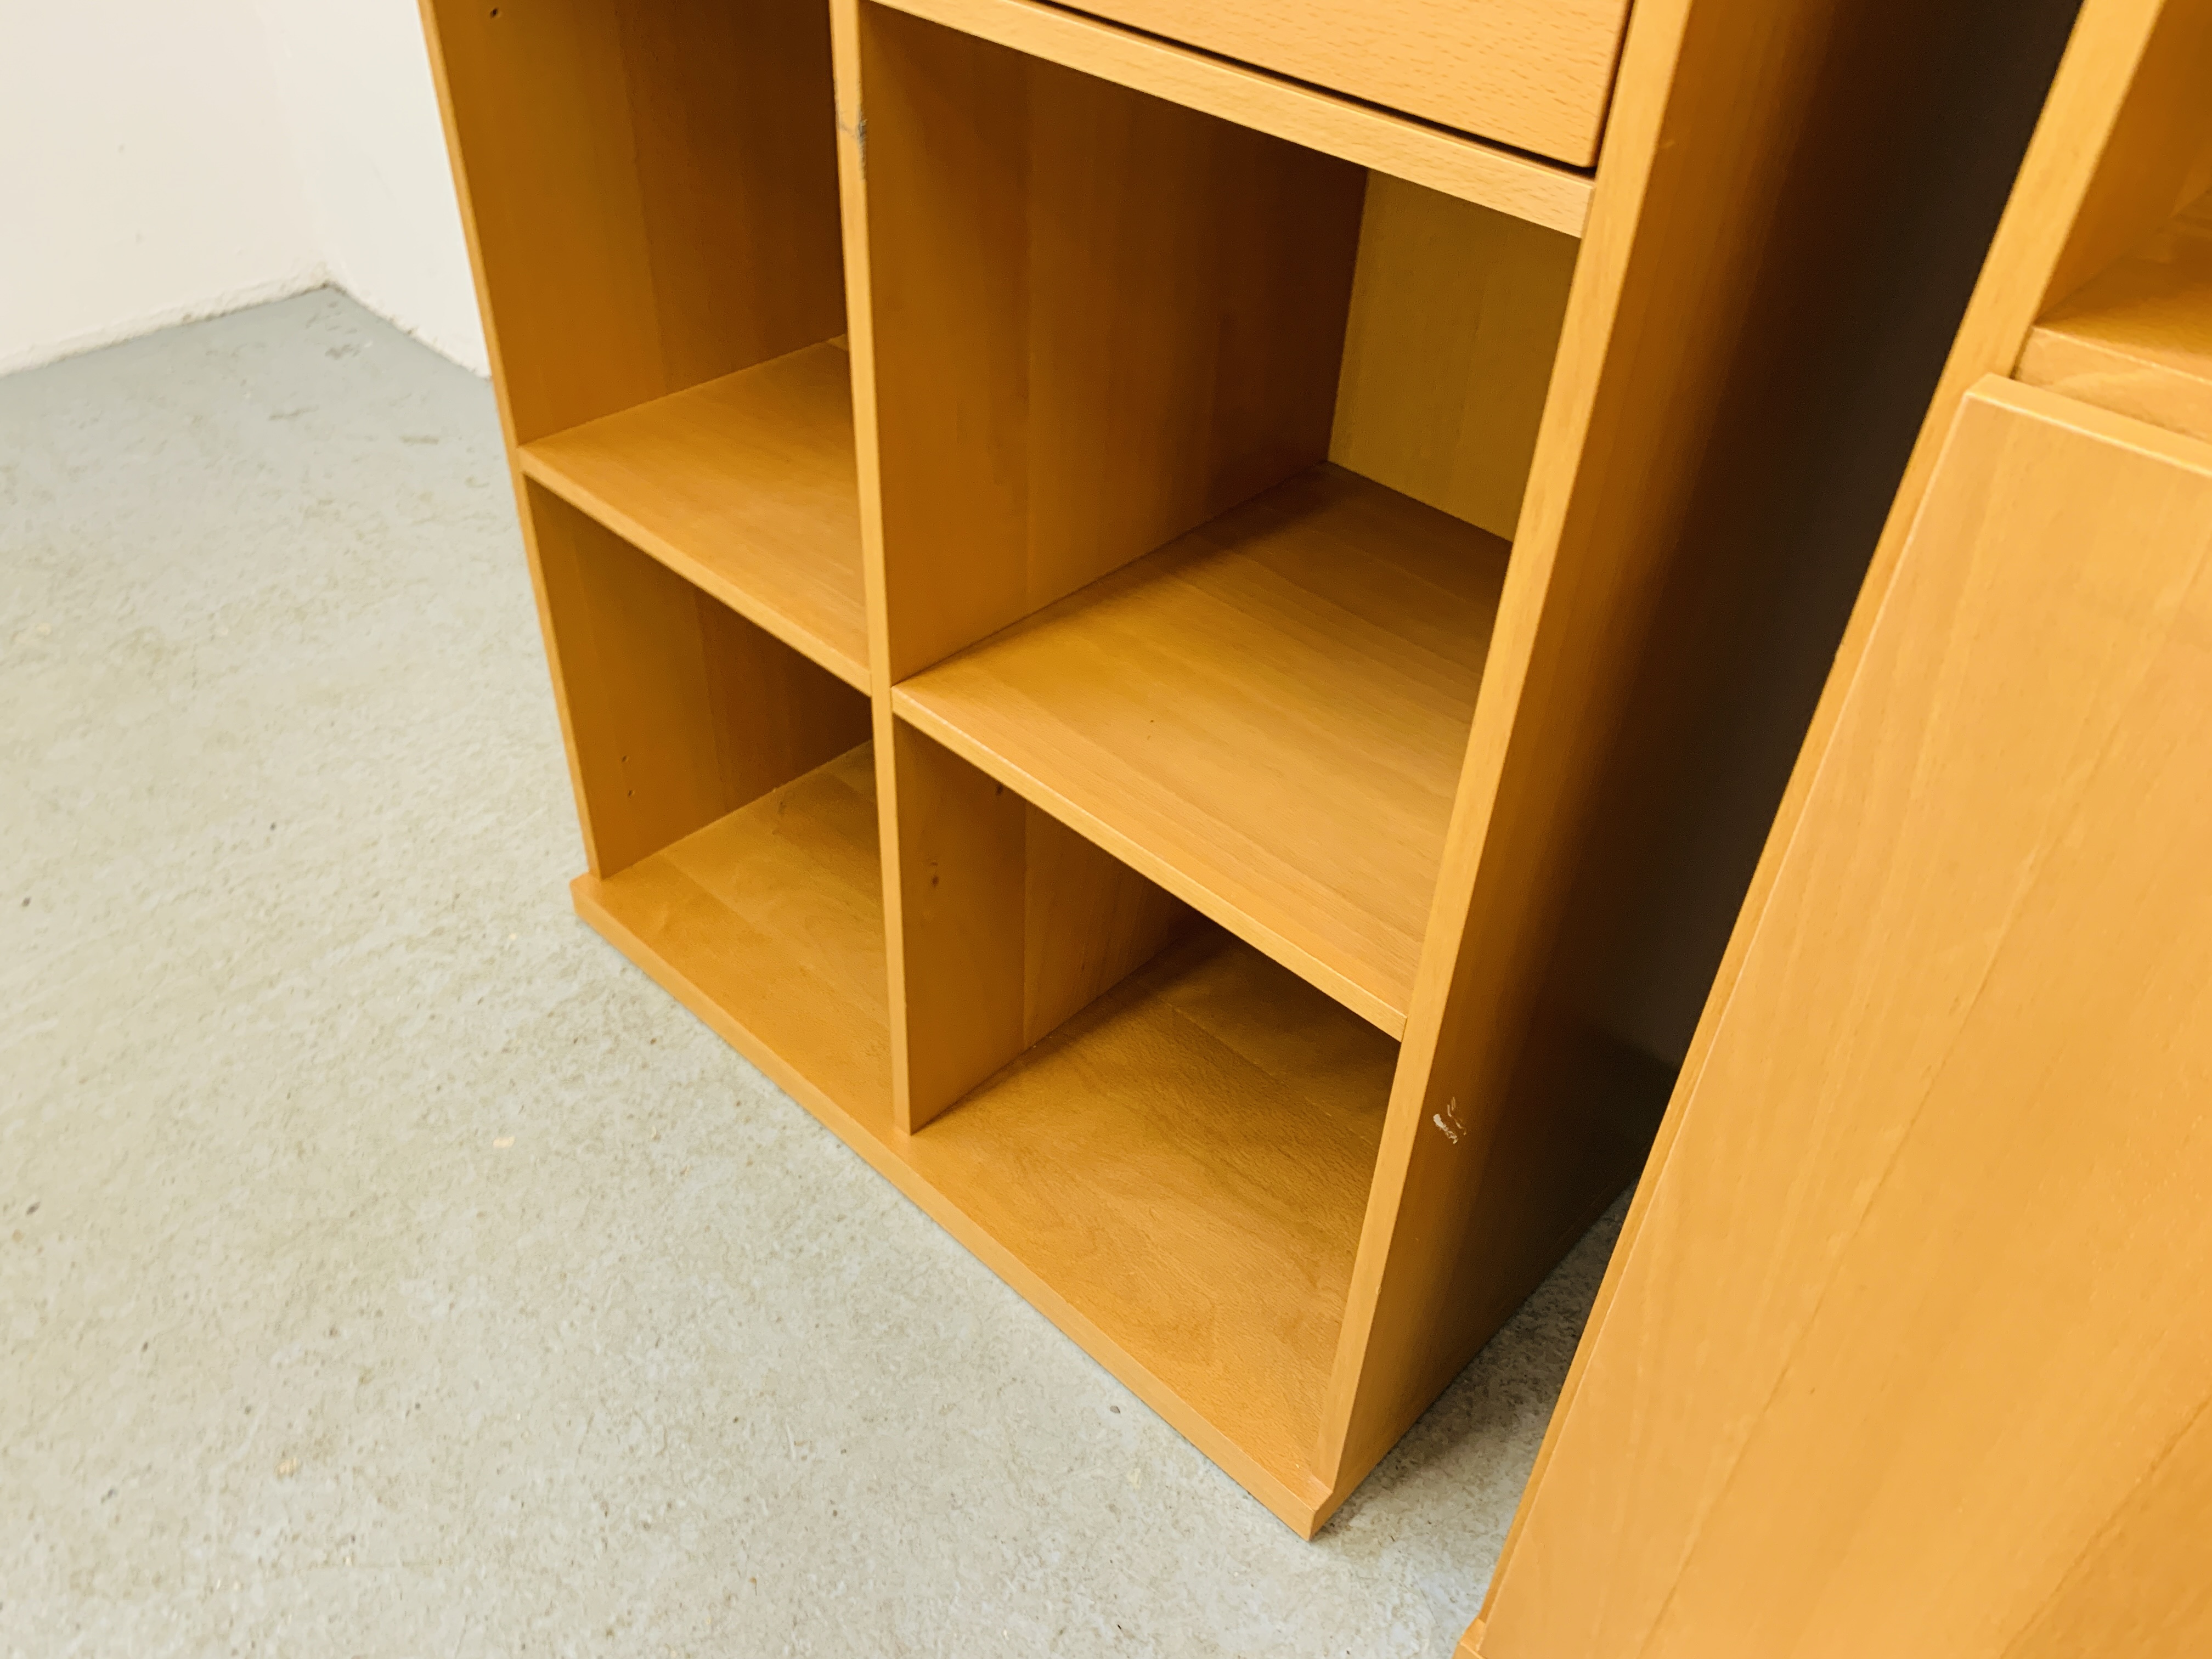 TWO MODERN BEECHWOOD FINISH HOME STORAGE UNITS EACH WIDTH 72CM. DEPTH 42CM. HEIGHT 146CM. - Image 6 of 9